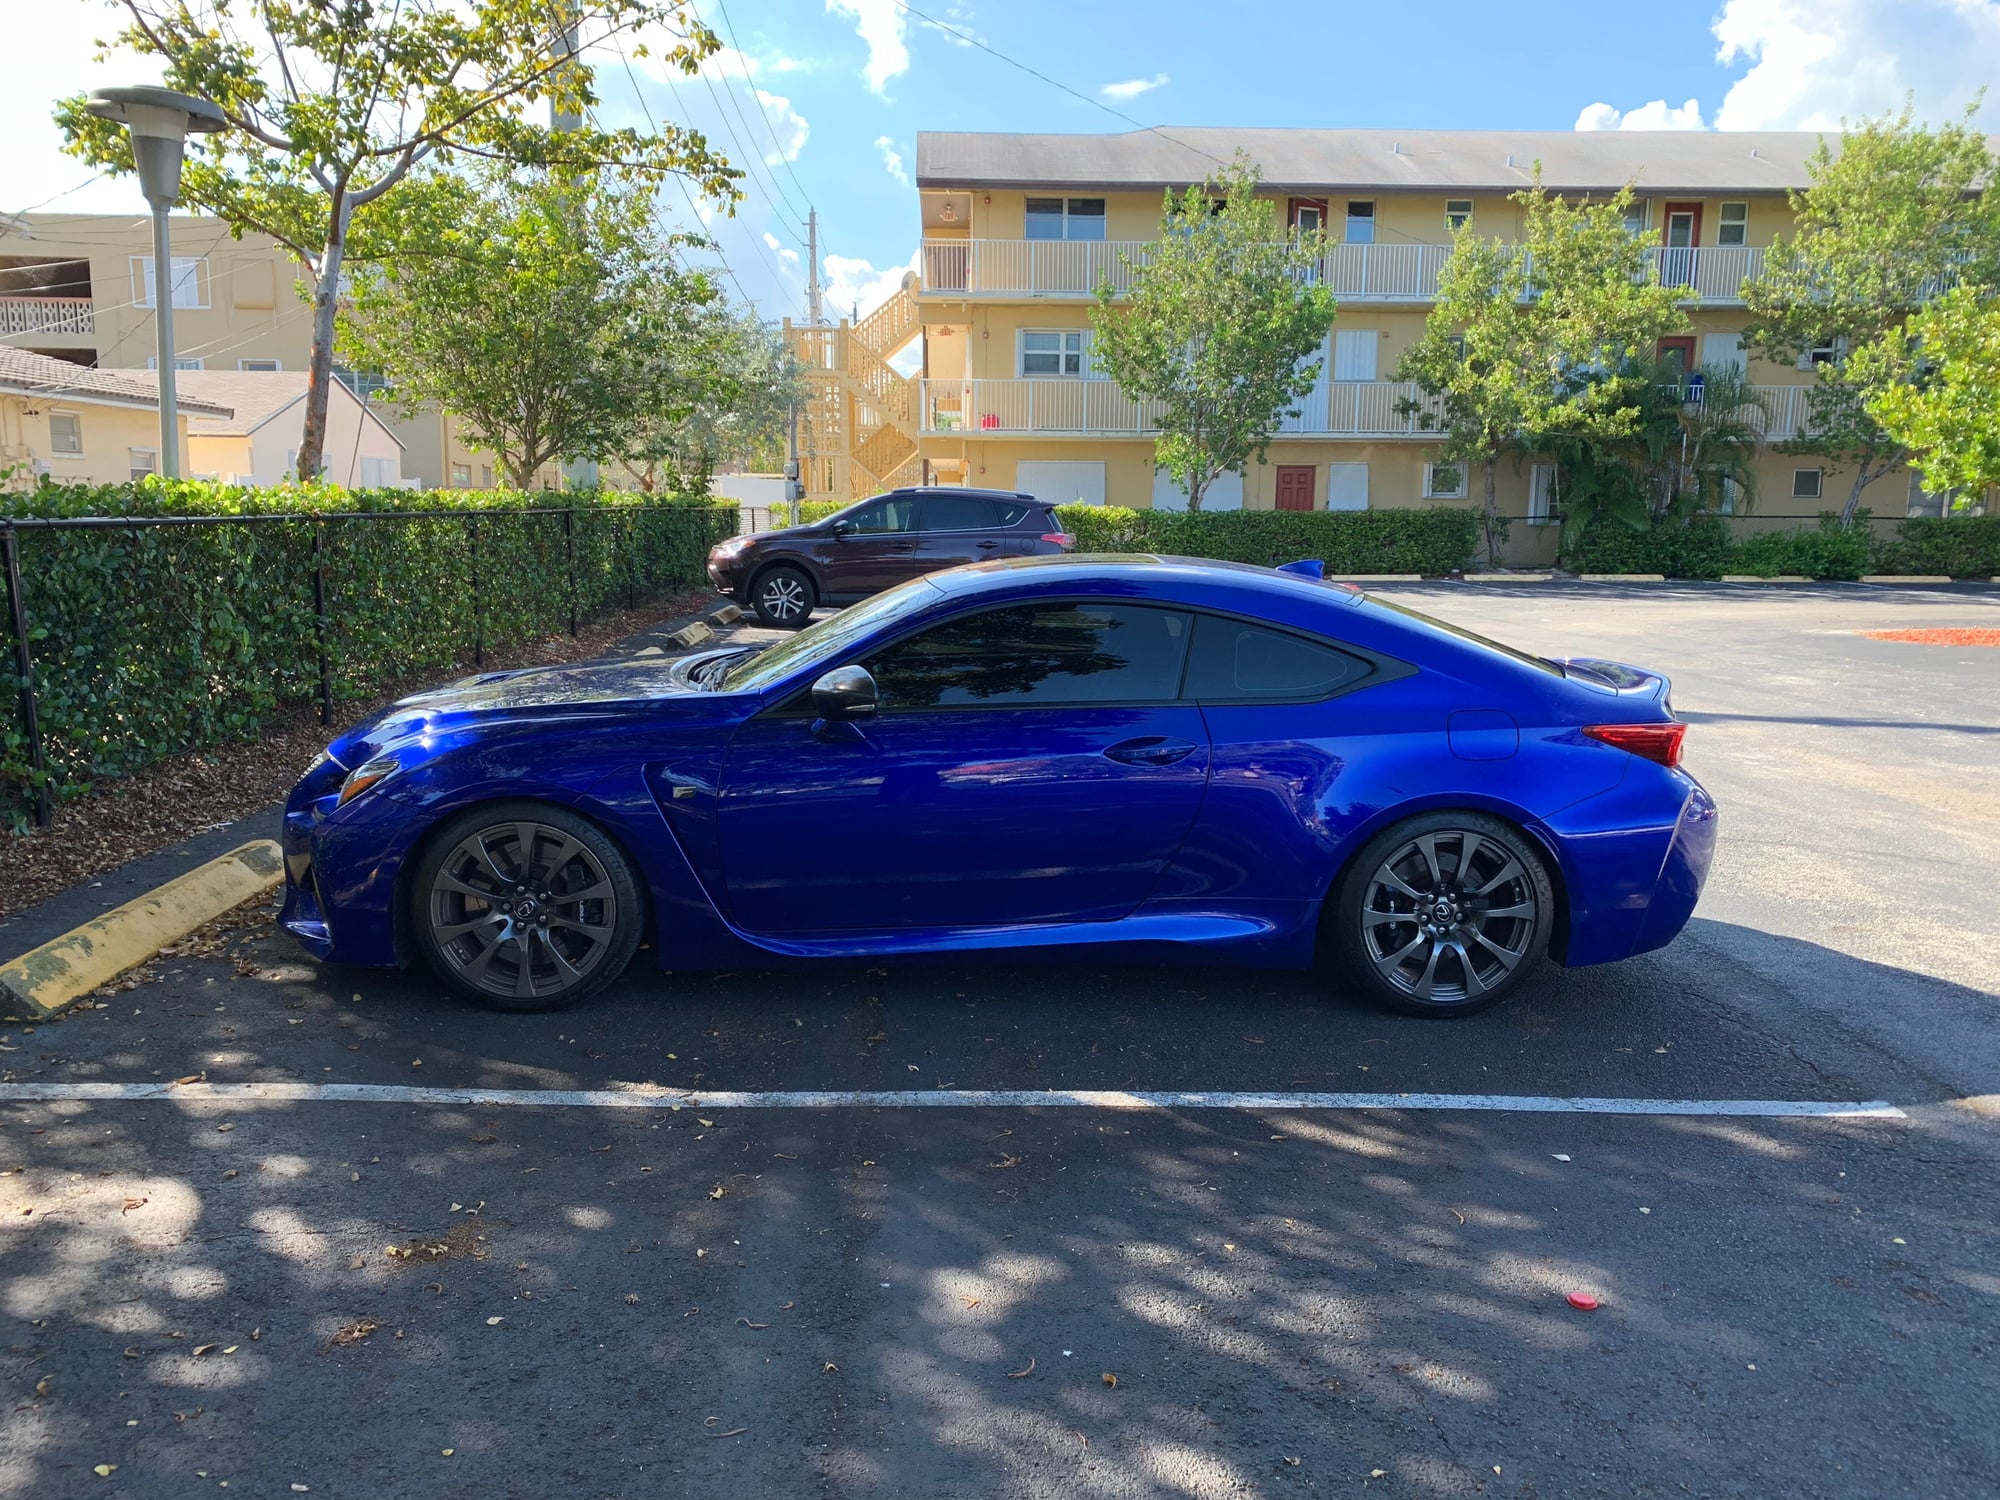 2015 Lexus RC F - 2015 Lexus RCF - Used - VIN Jthhp5bc3f5000751 - 56,000 Miles - Automatic - Coupe - Blue - West Palm Beach, FL 33417, United States